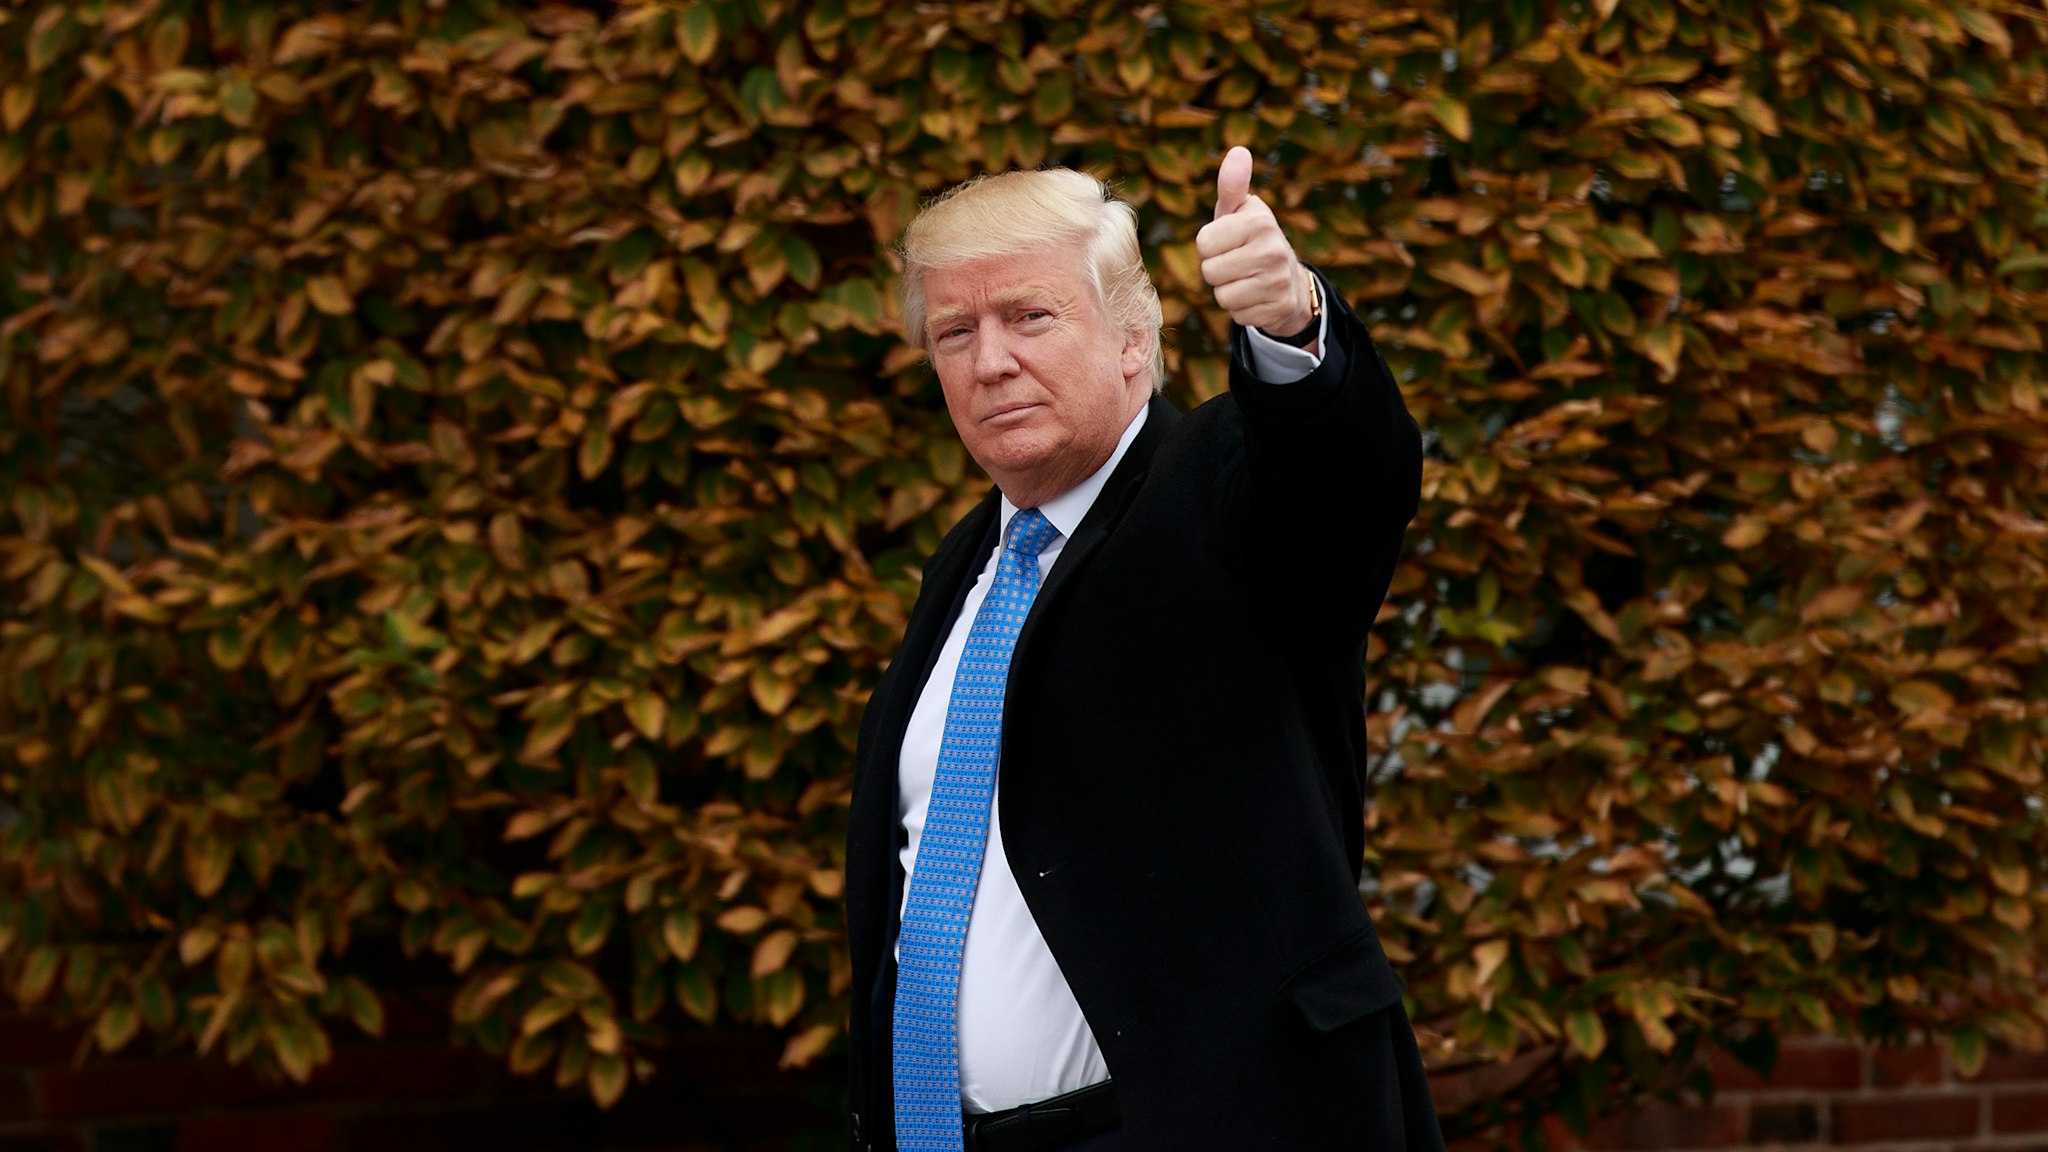 BEDMINSTER TOWNSHIP, NJ - NOVEMBER 20: President-elect Donald Trump waves as he arrives at Trump International Golf Club for a day of meetings, November 20, 2016 in Bedminster Township, New Jersey. Trump and his transition team are in the process of filling cabinet and other high level positions for the new administration.